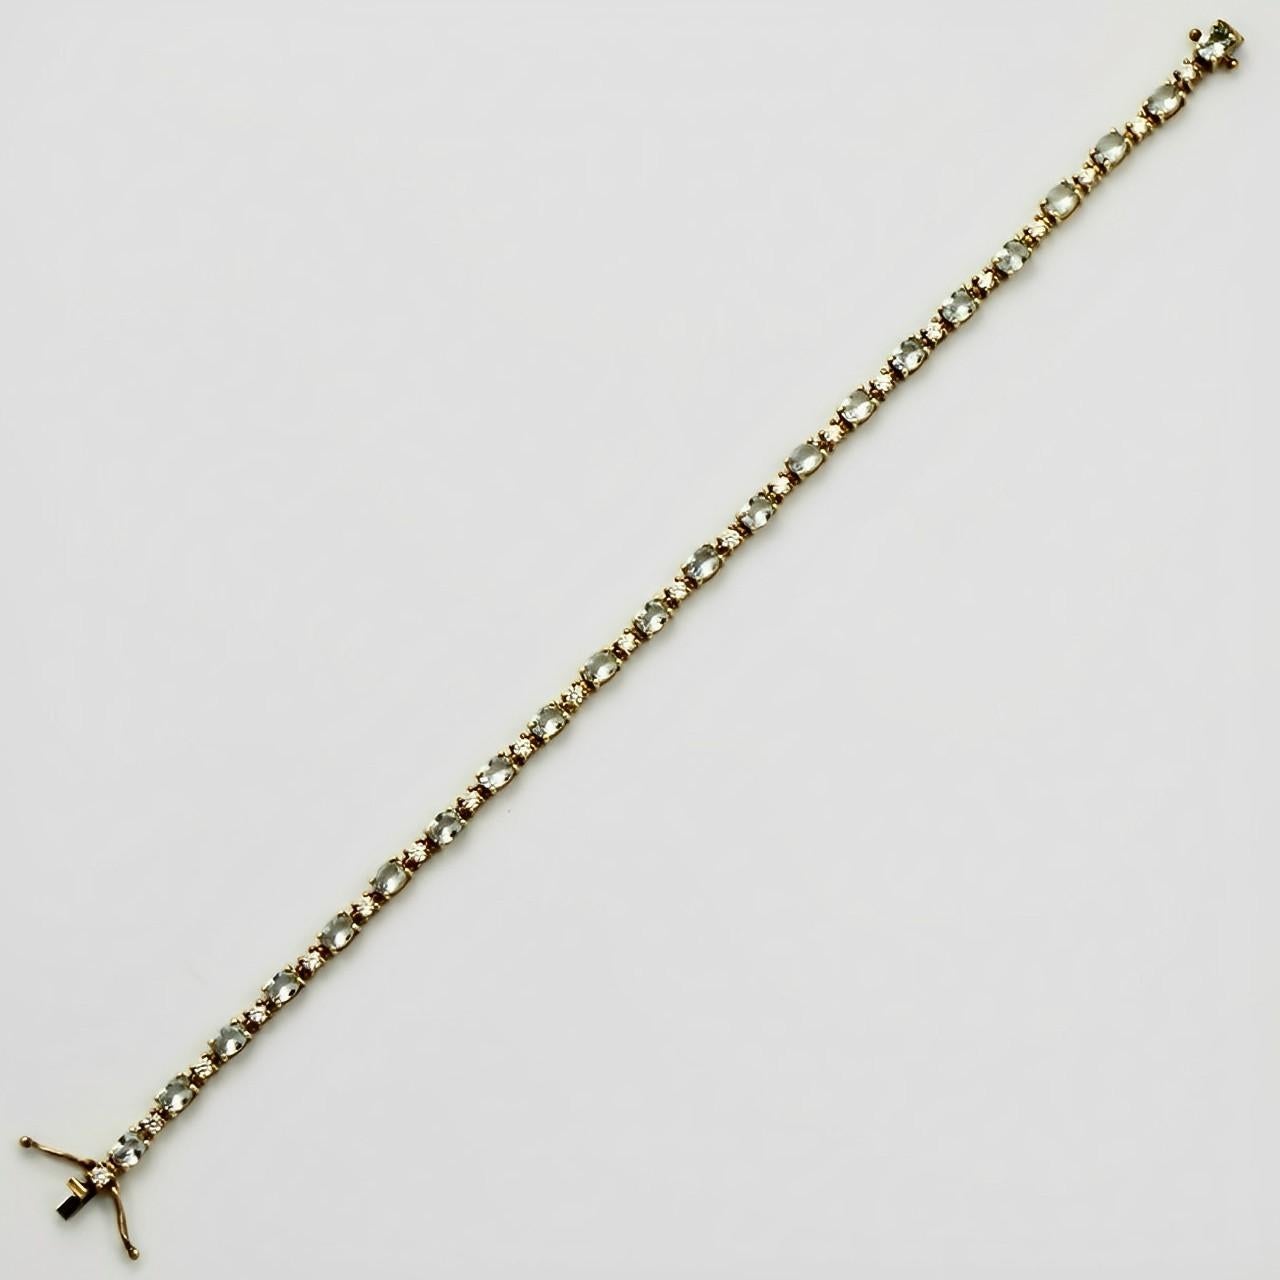 Gold Vermeil on Sterling Silver Tennis Bracelet Pale Blue Clear Cubic Zirconias In Good Condition For Sale In London, GB